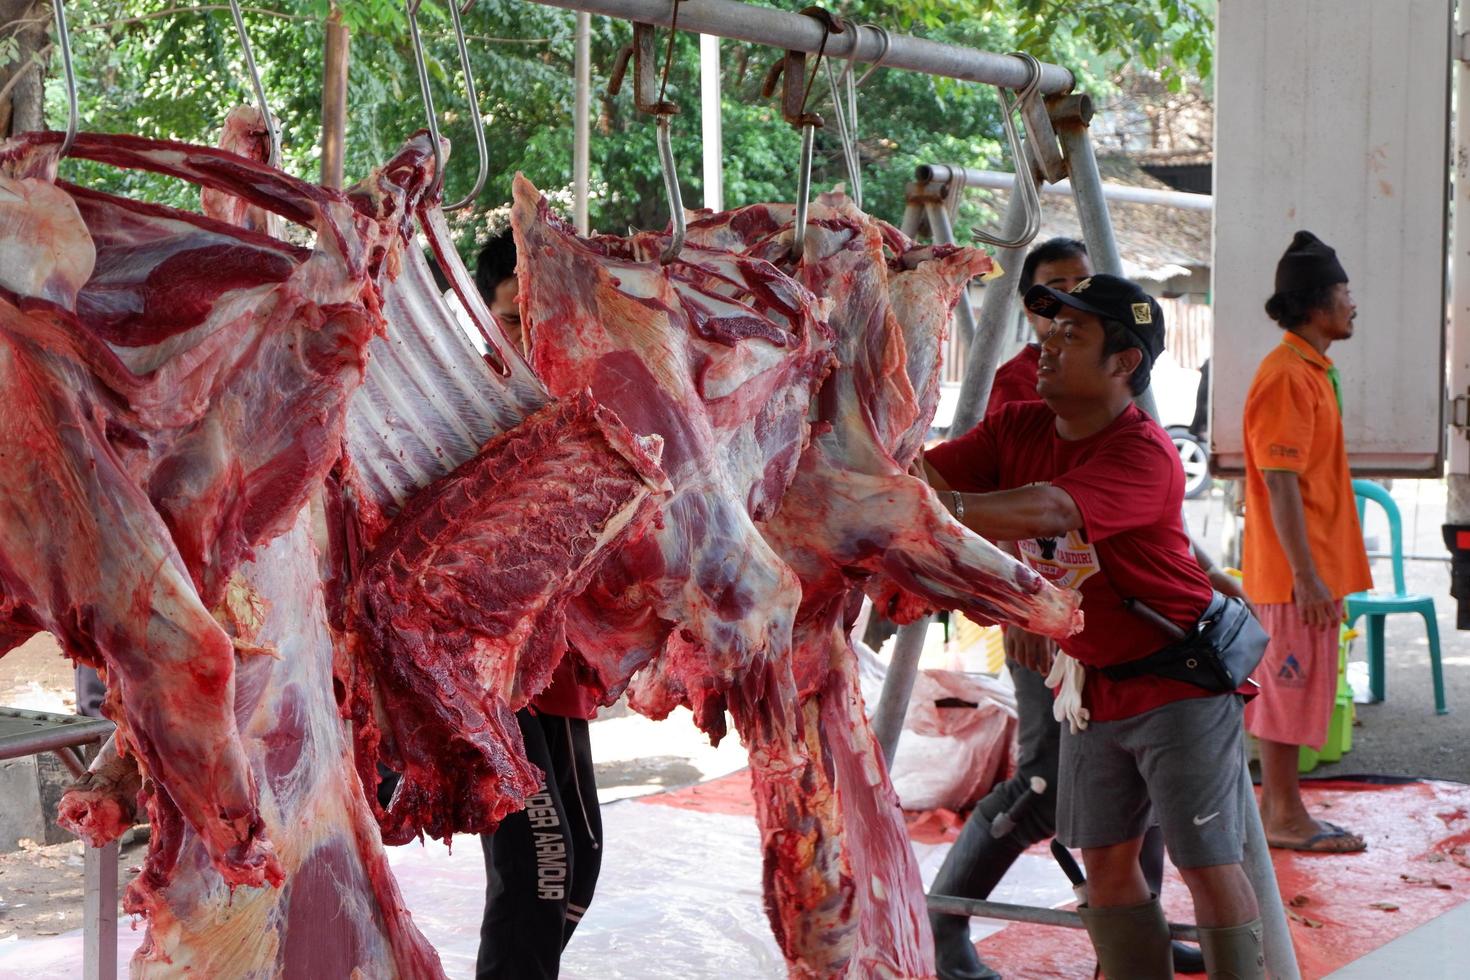 East Jakarta, Indonesia - July 11, 2022,  Man wearing a red shirt is cutting beef at the slaughter in idul adha photo